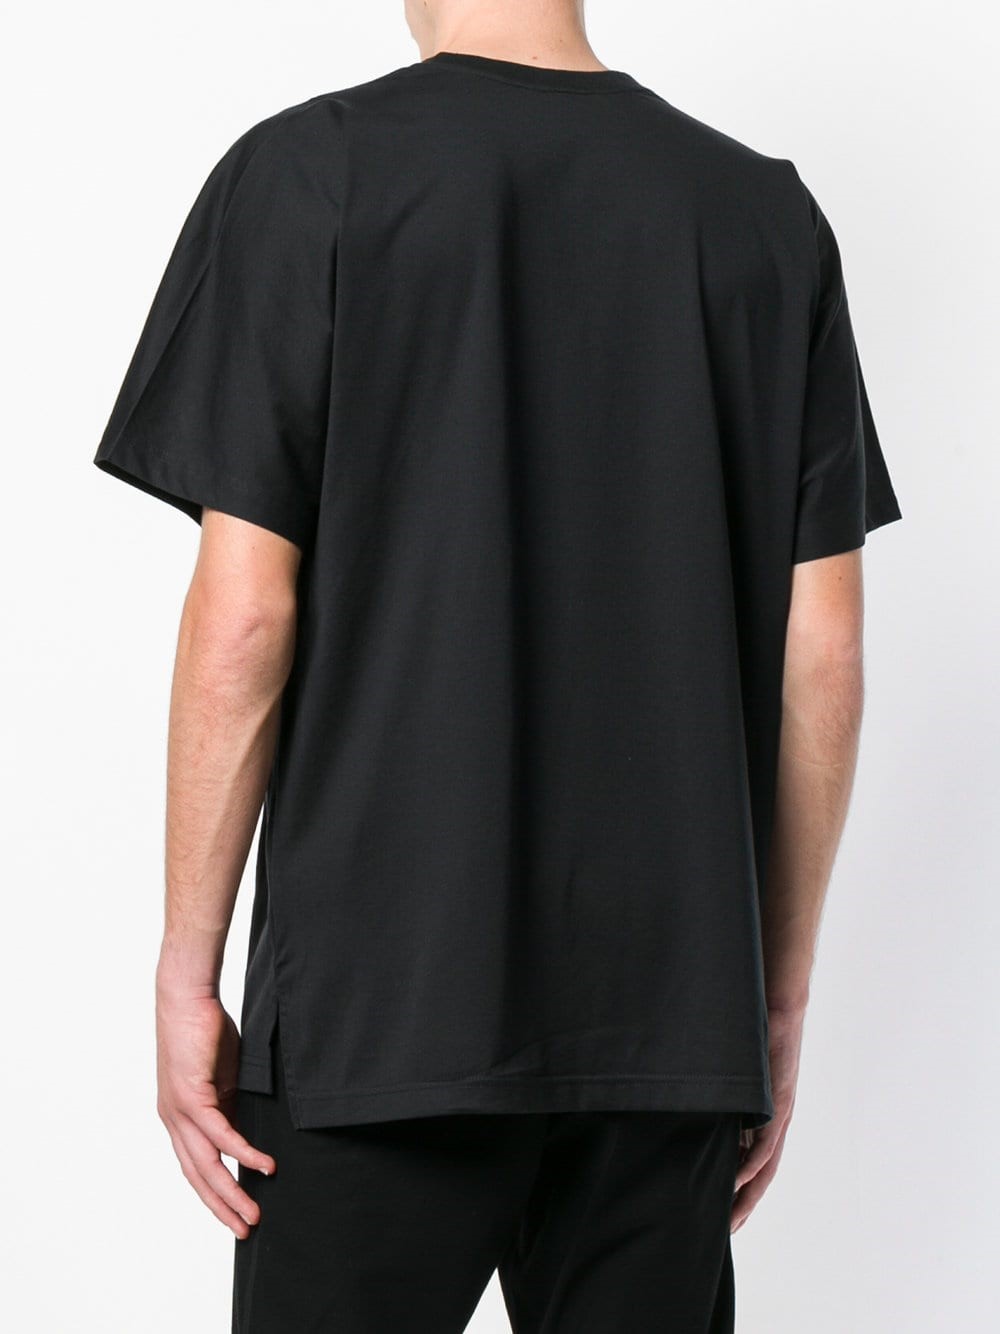 y-3 LOGO T-SHIRT available on montiboutique.com - 24546